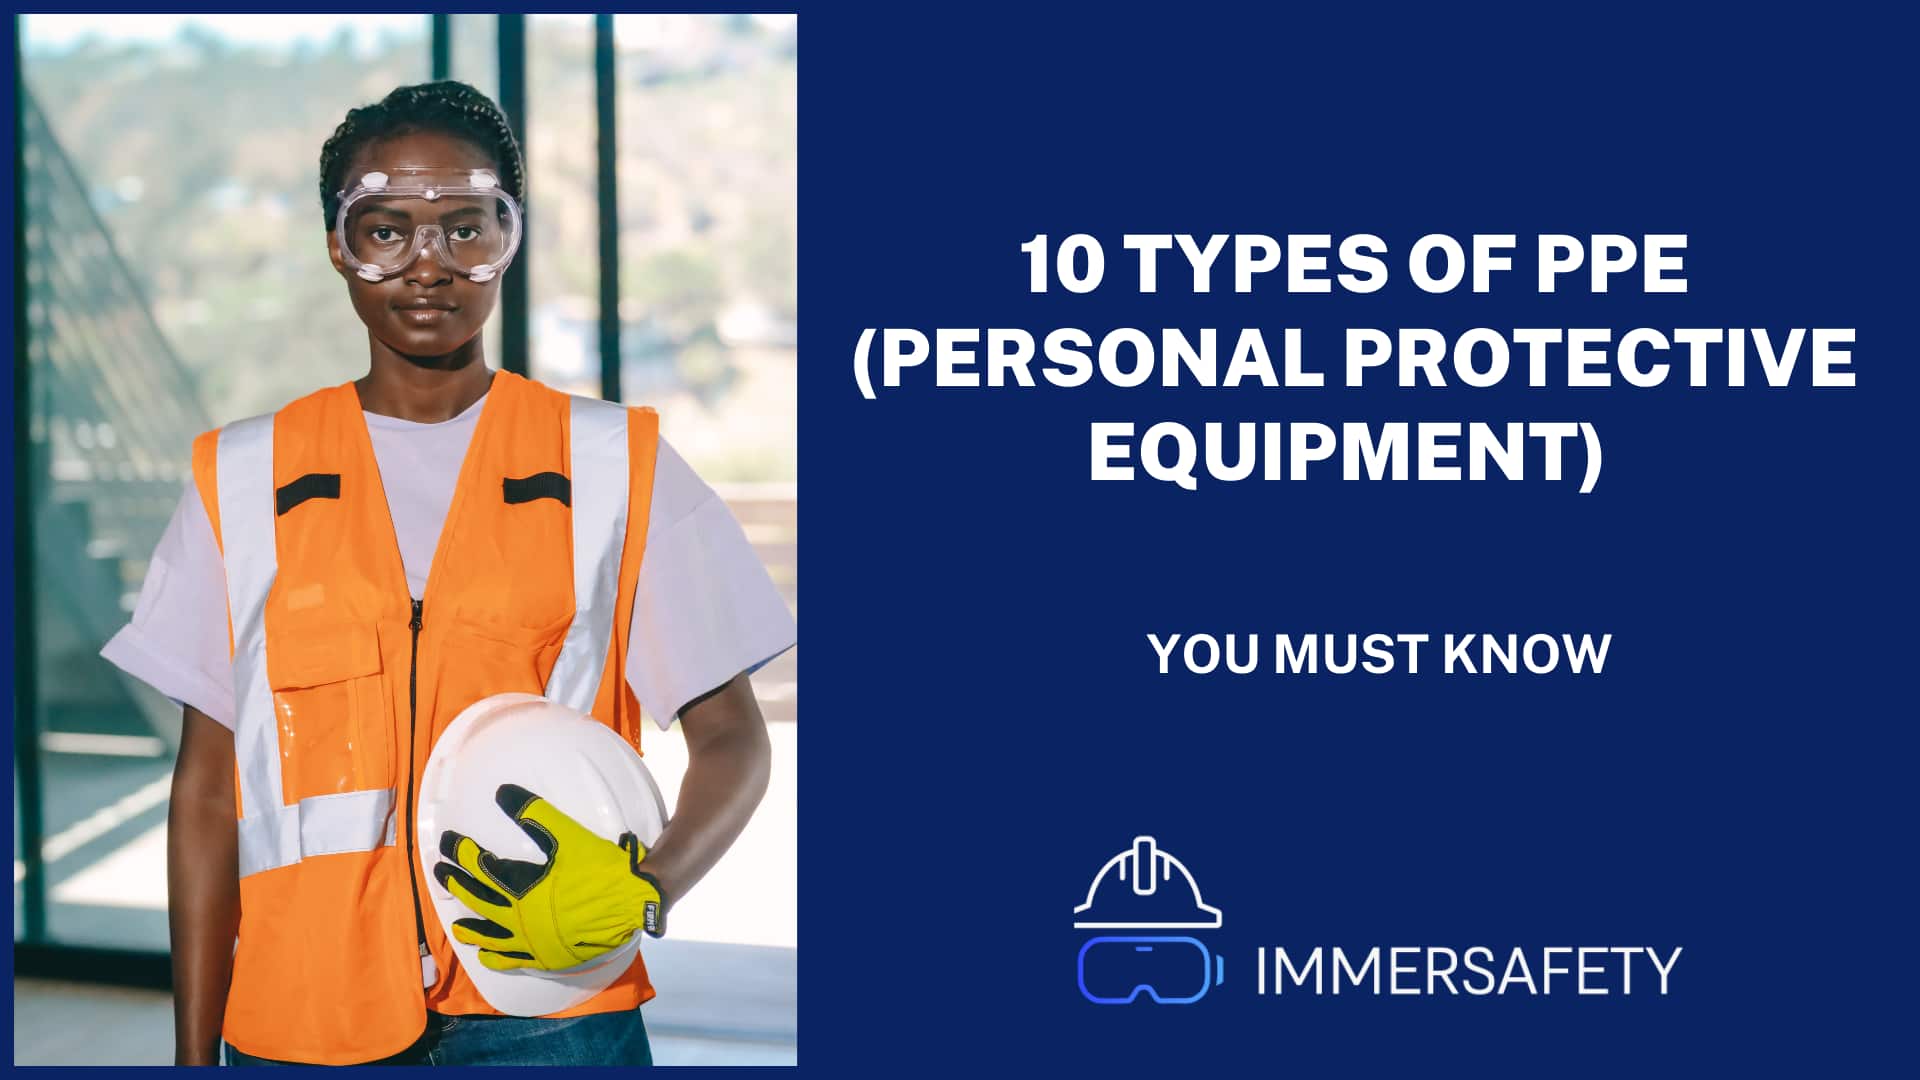 10 Different Types Of PPE (Personal Protective Equipment)